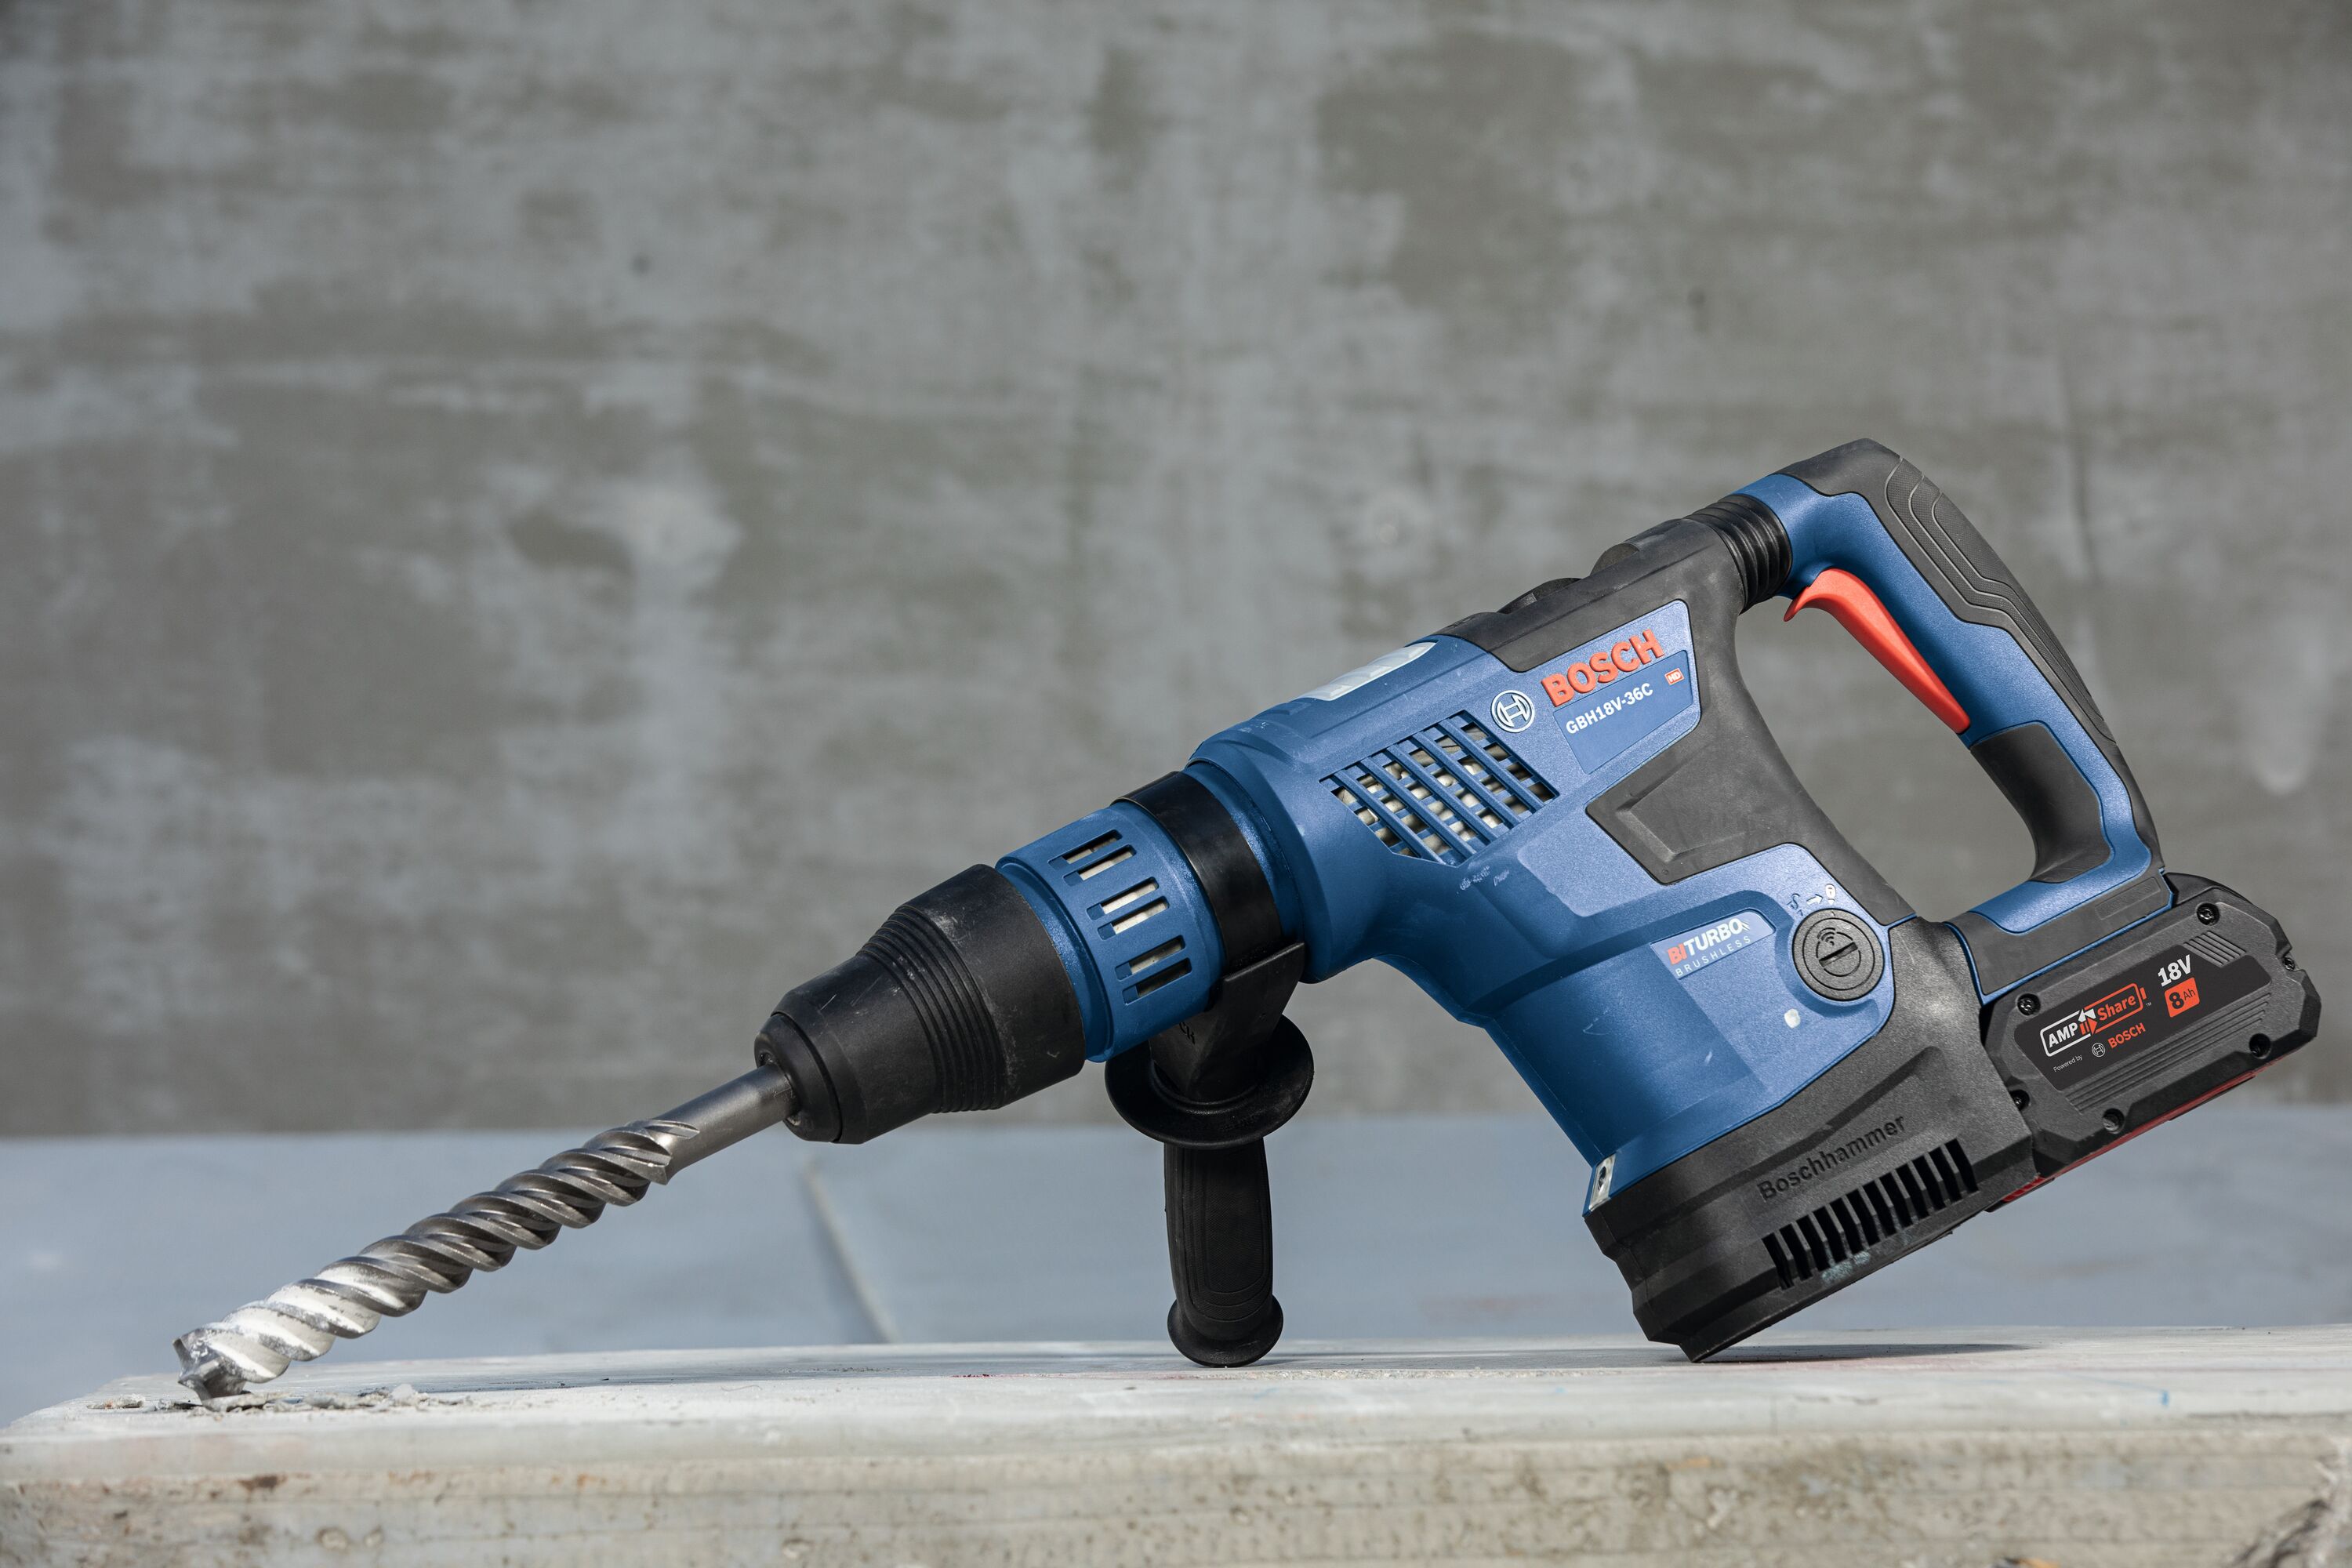 Bosch PROFACTOR 18-volt 8-Amp 1-9/16-in Drill the Tool) Hammer Speed Drills Rotary department at Sds-max Variable (Bare in Hammer Rotary Cordless